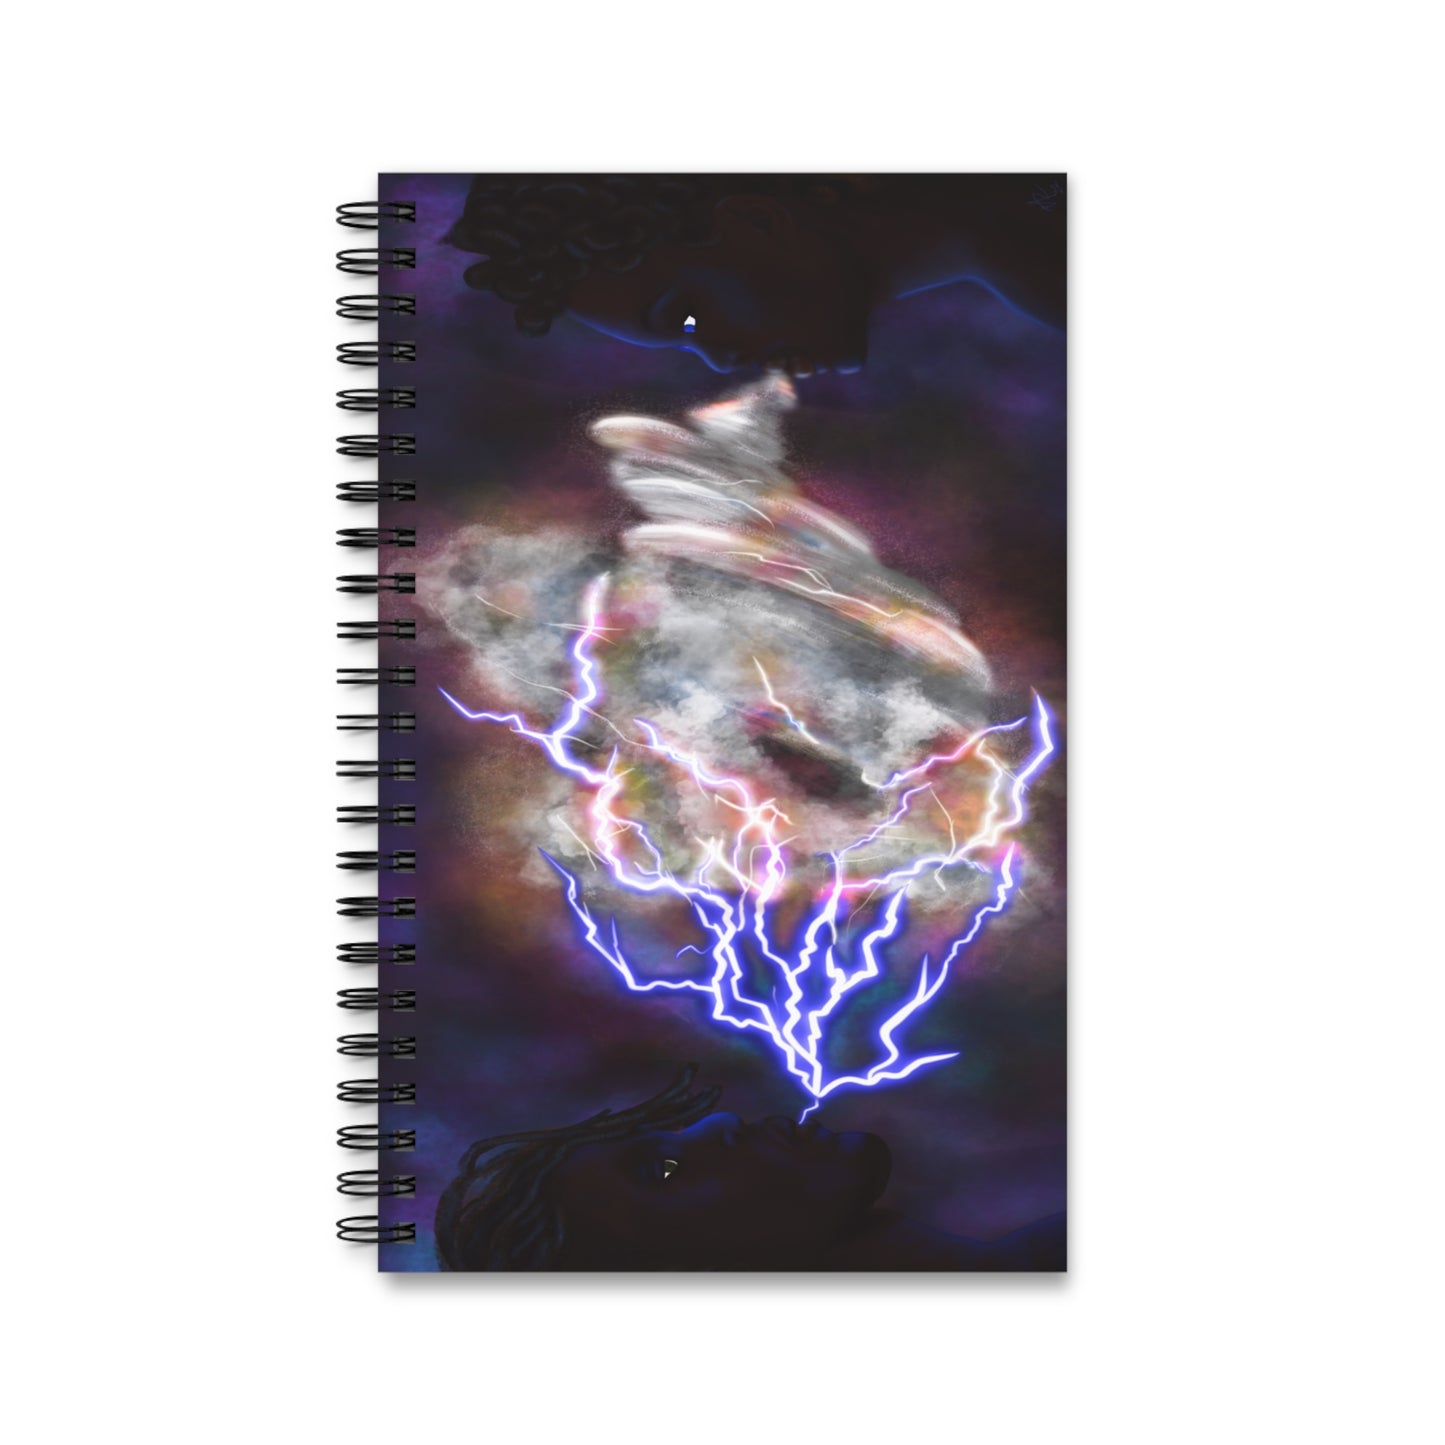 A Perfect Storm Spiral Notebook  (Blank/Lined/Task)